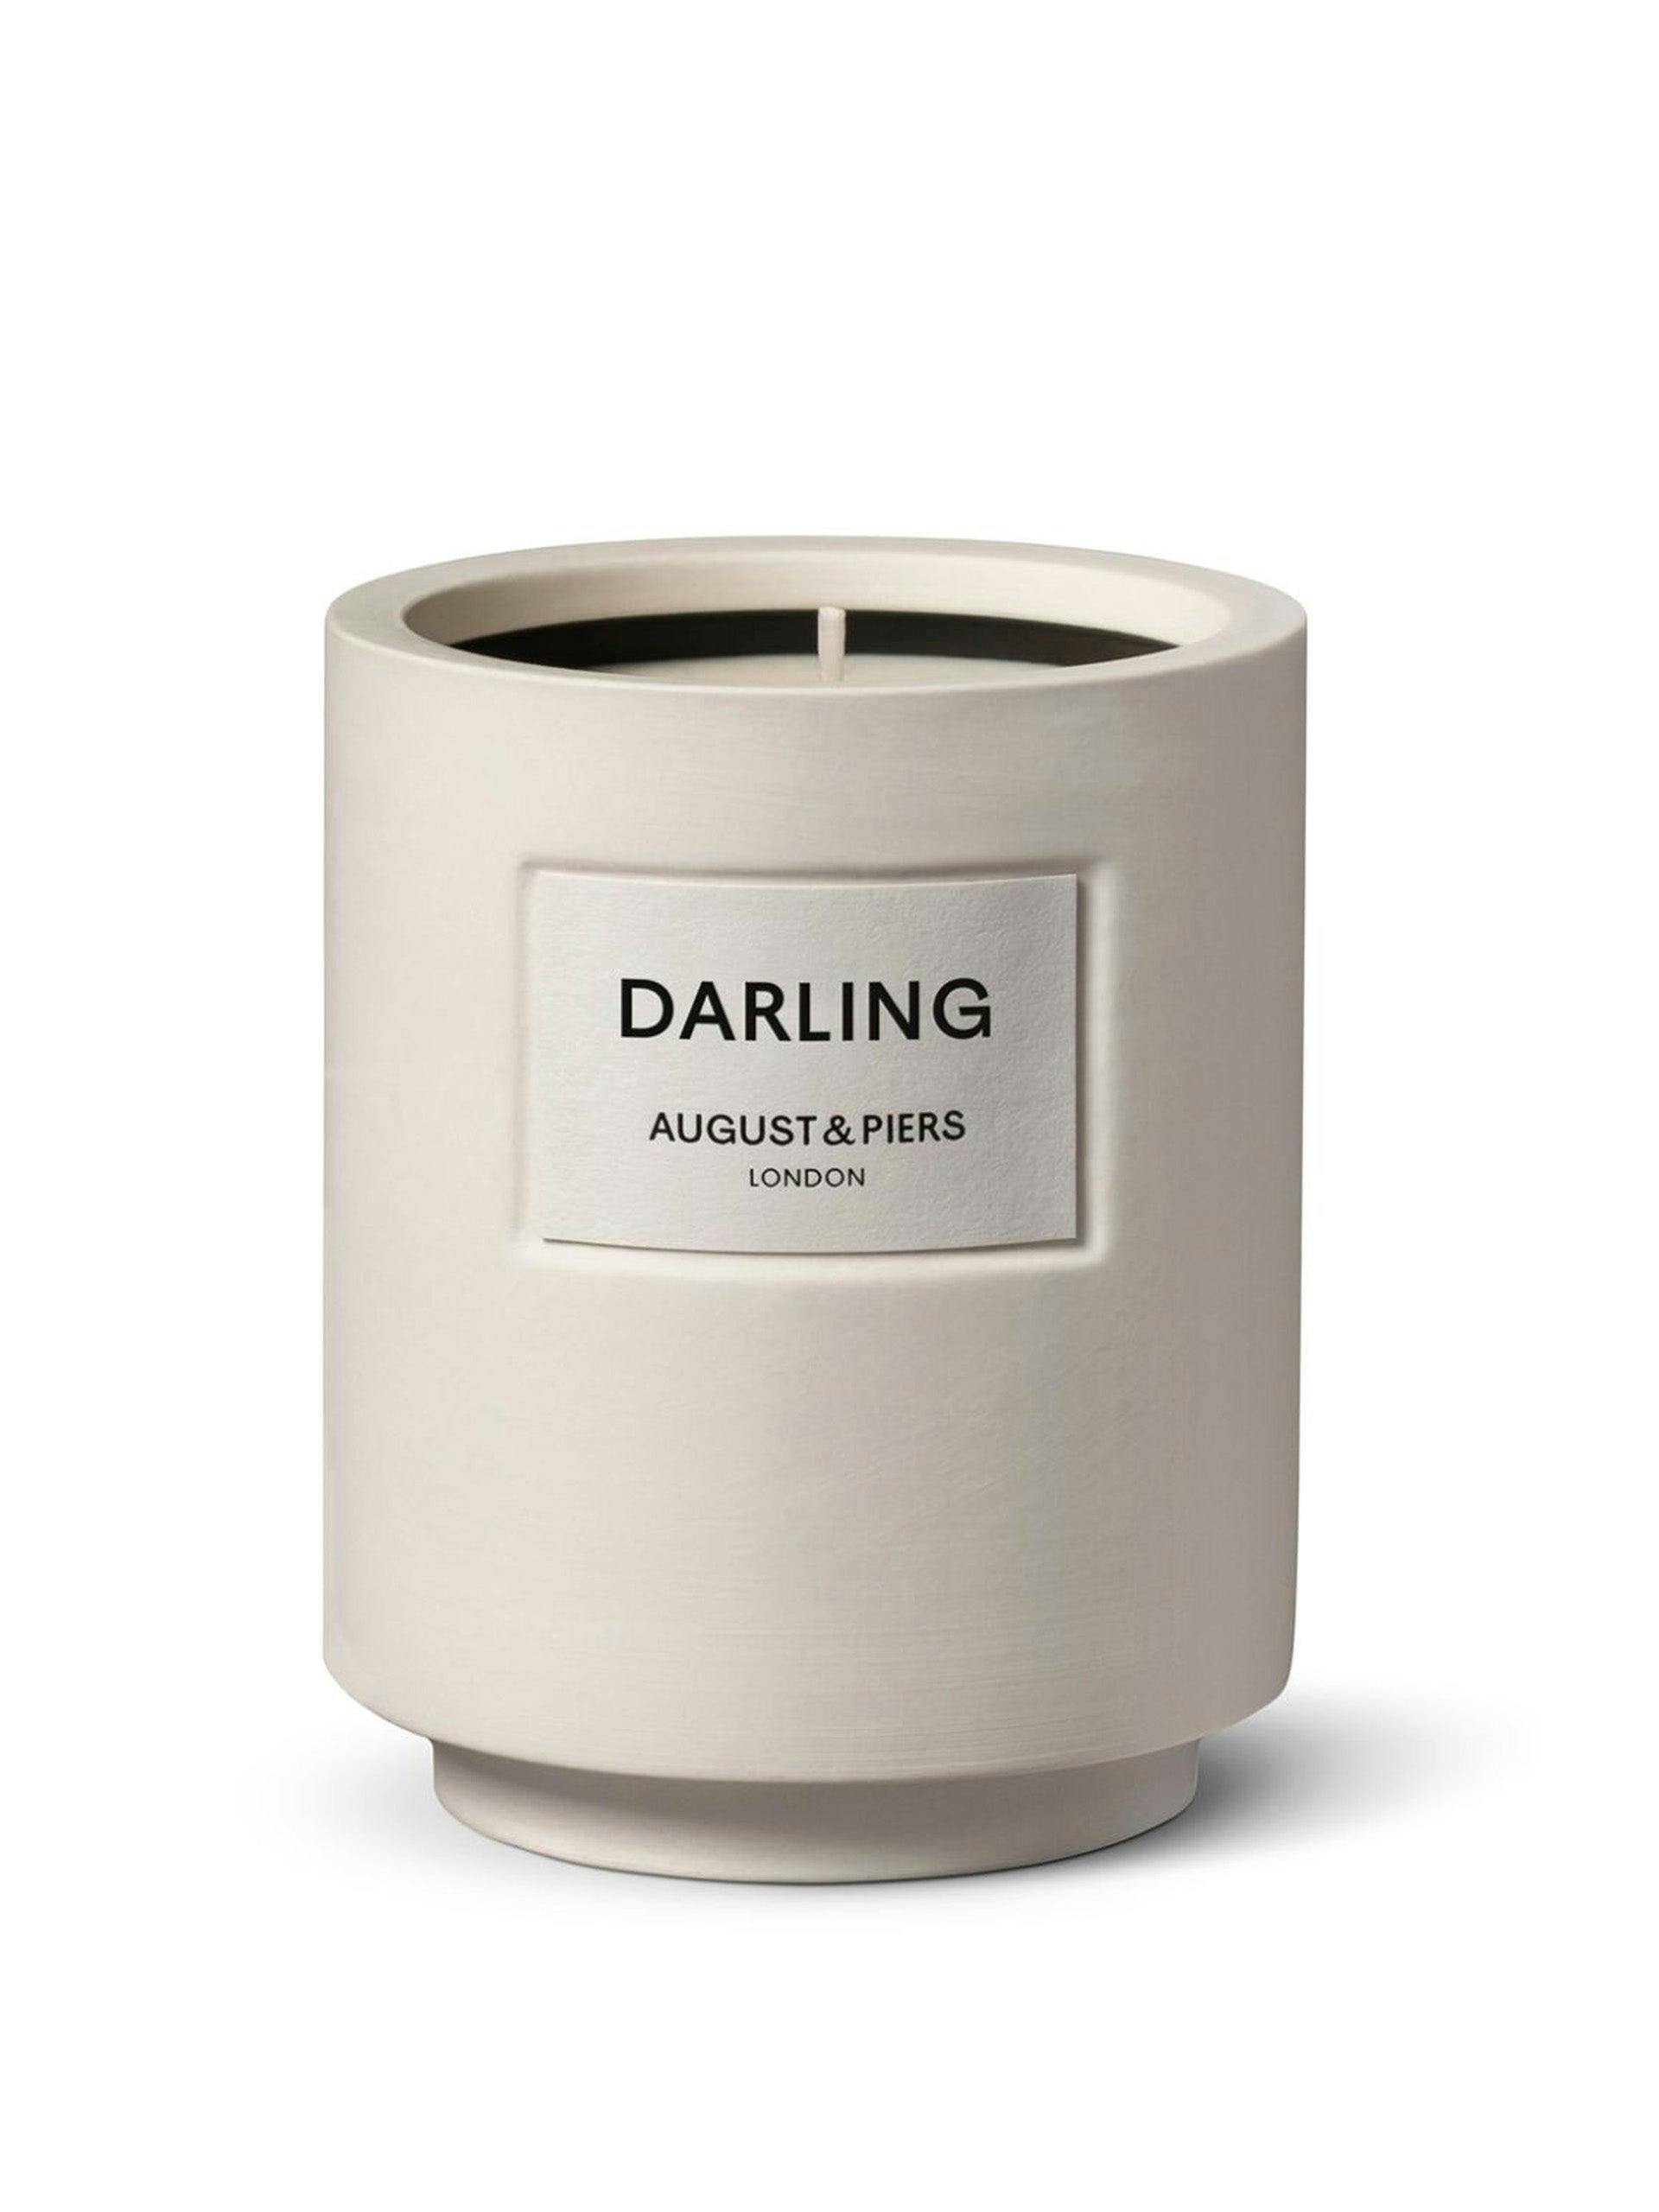 Darling candle